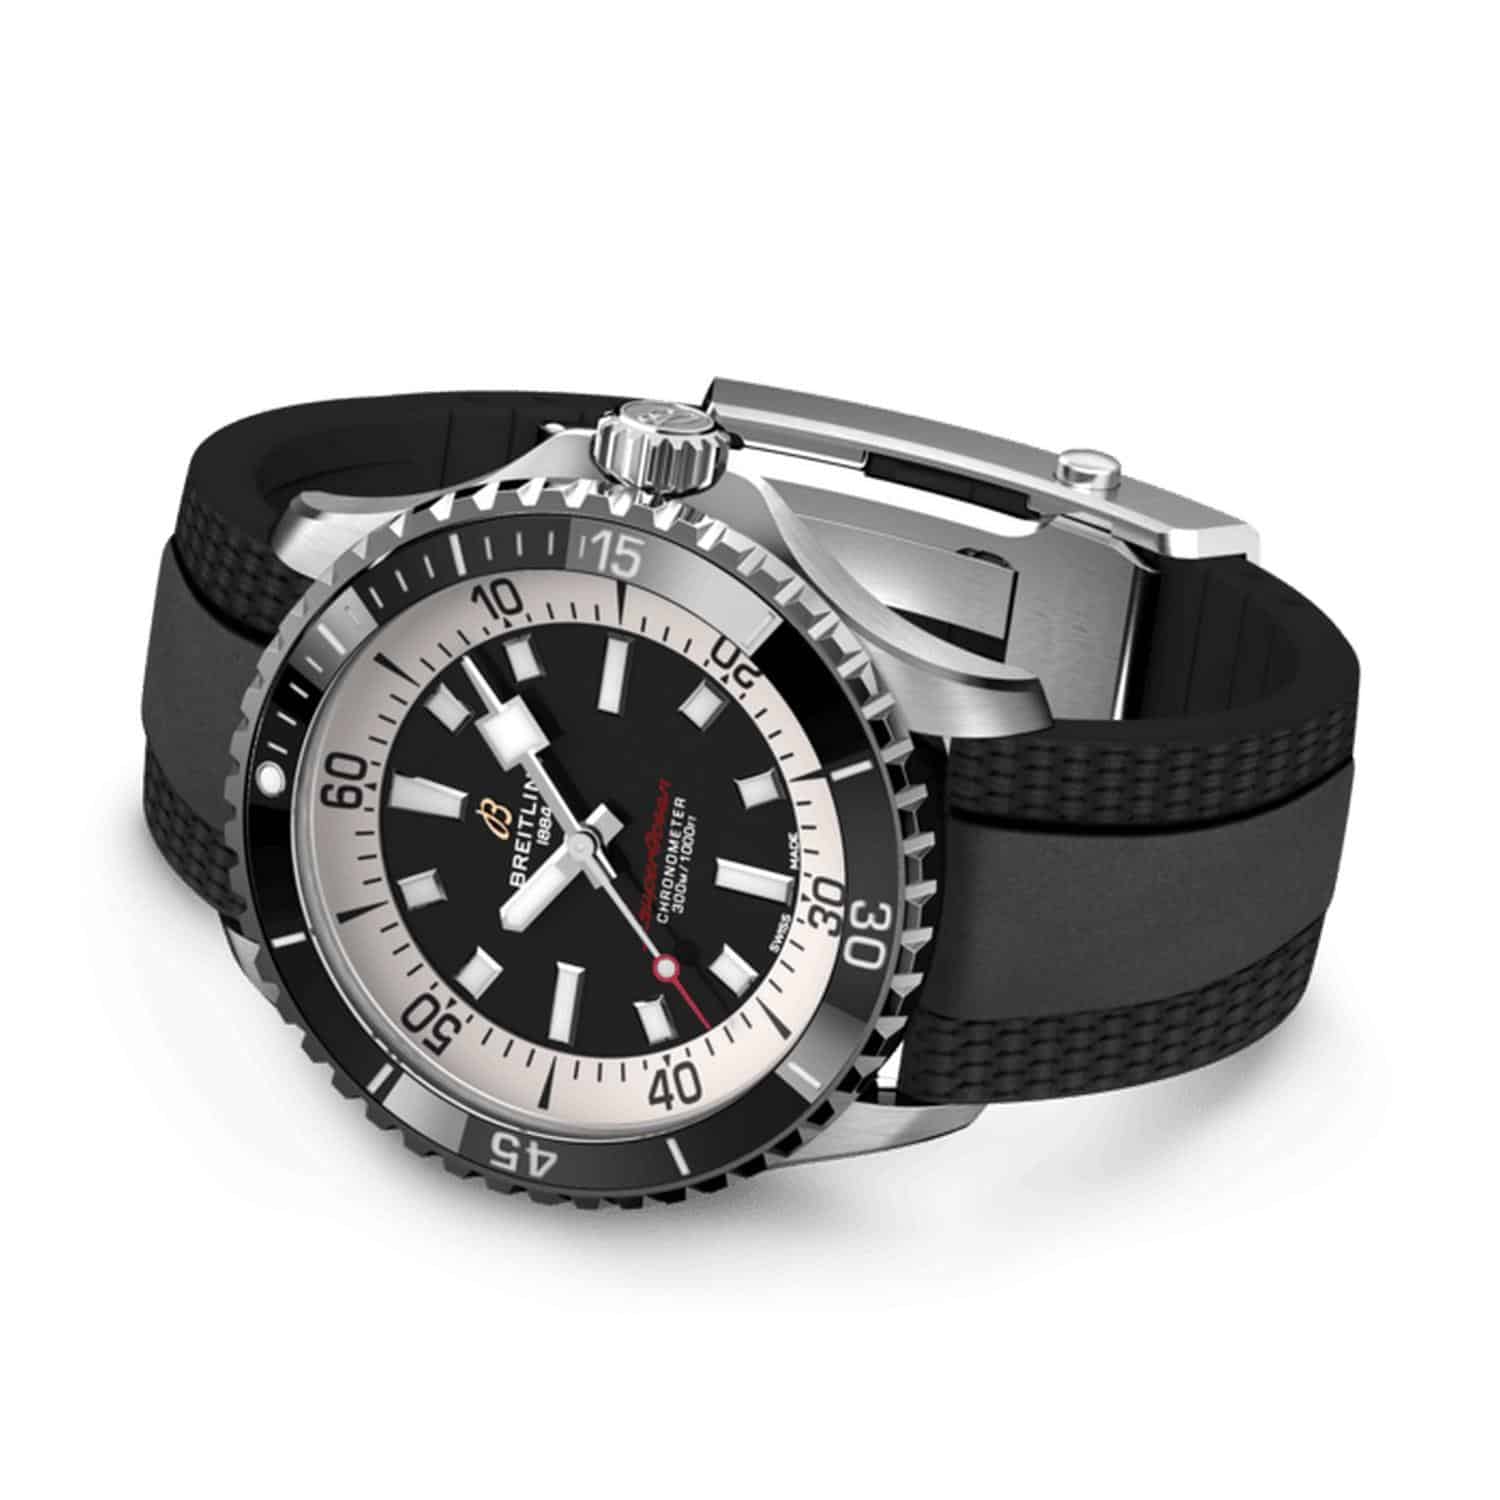 BREITLING SUPEROCEAN III AUTOMATIC 42 - A17375211B1S1